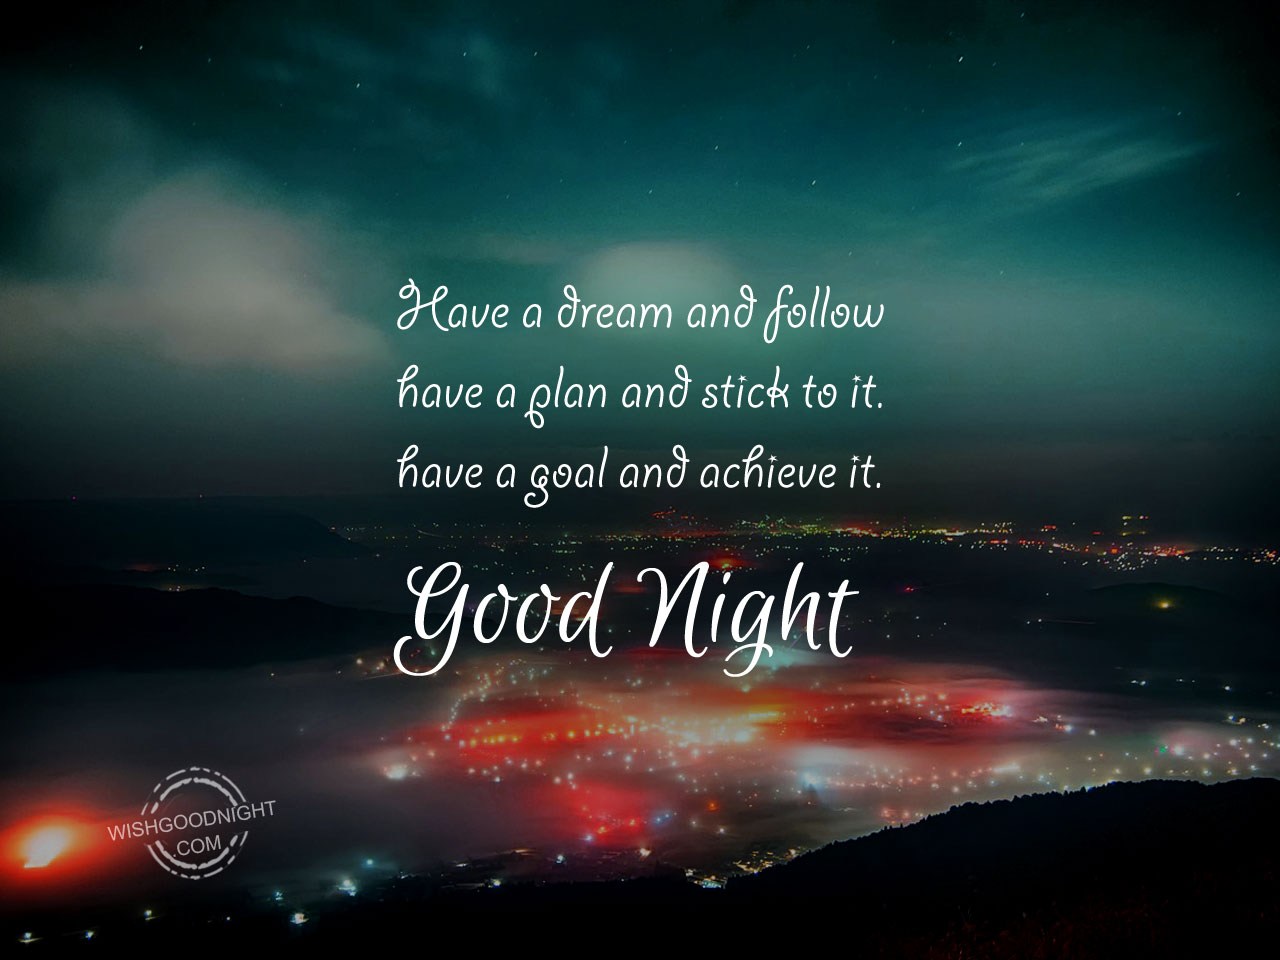 Have a dream and follow - Good Night Pictures – WishGoodNight.com